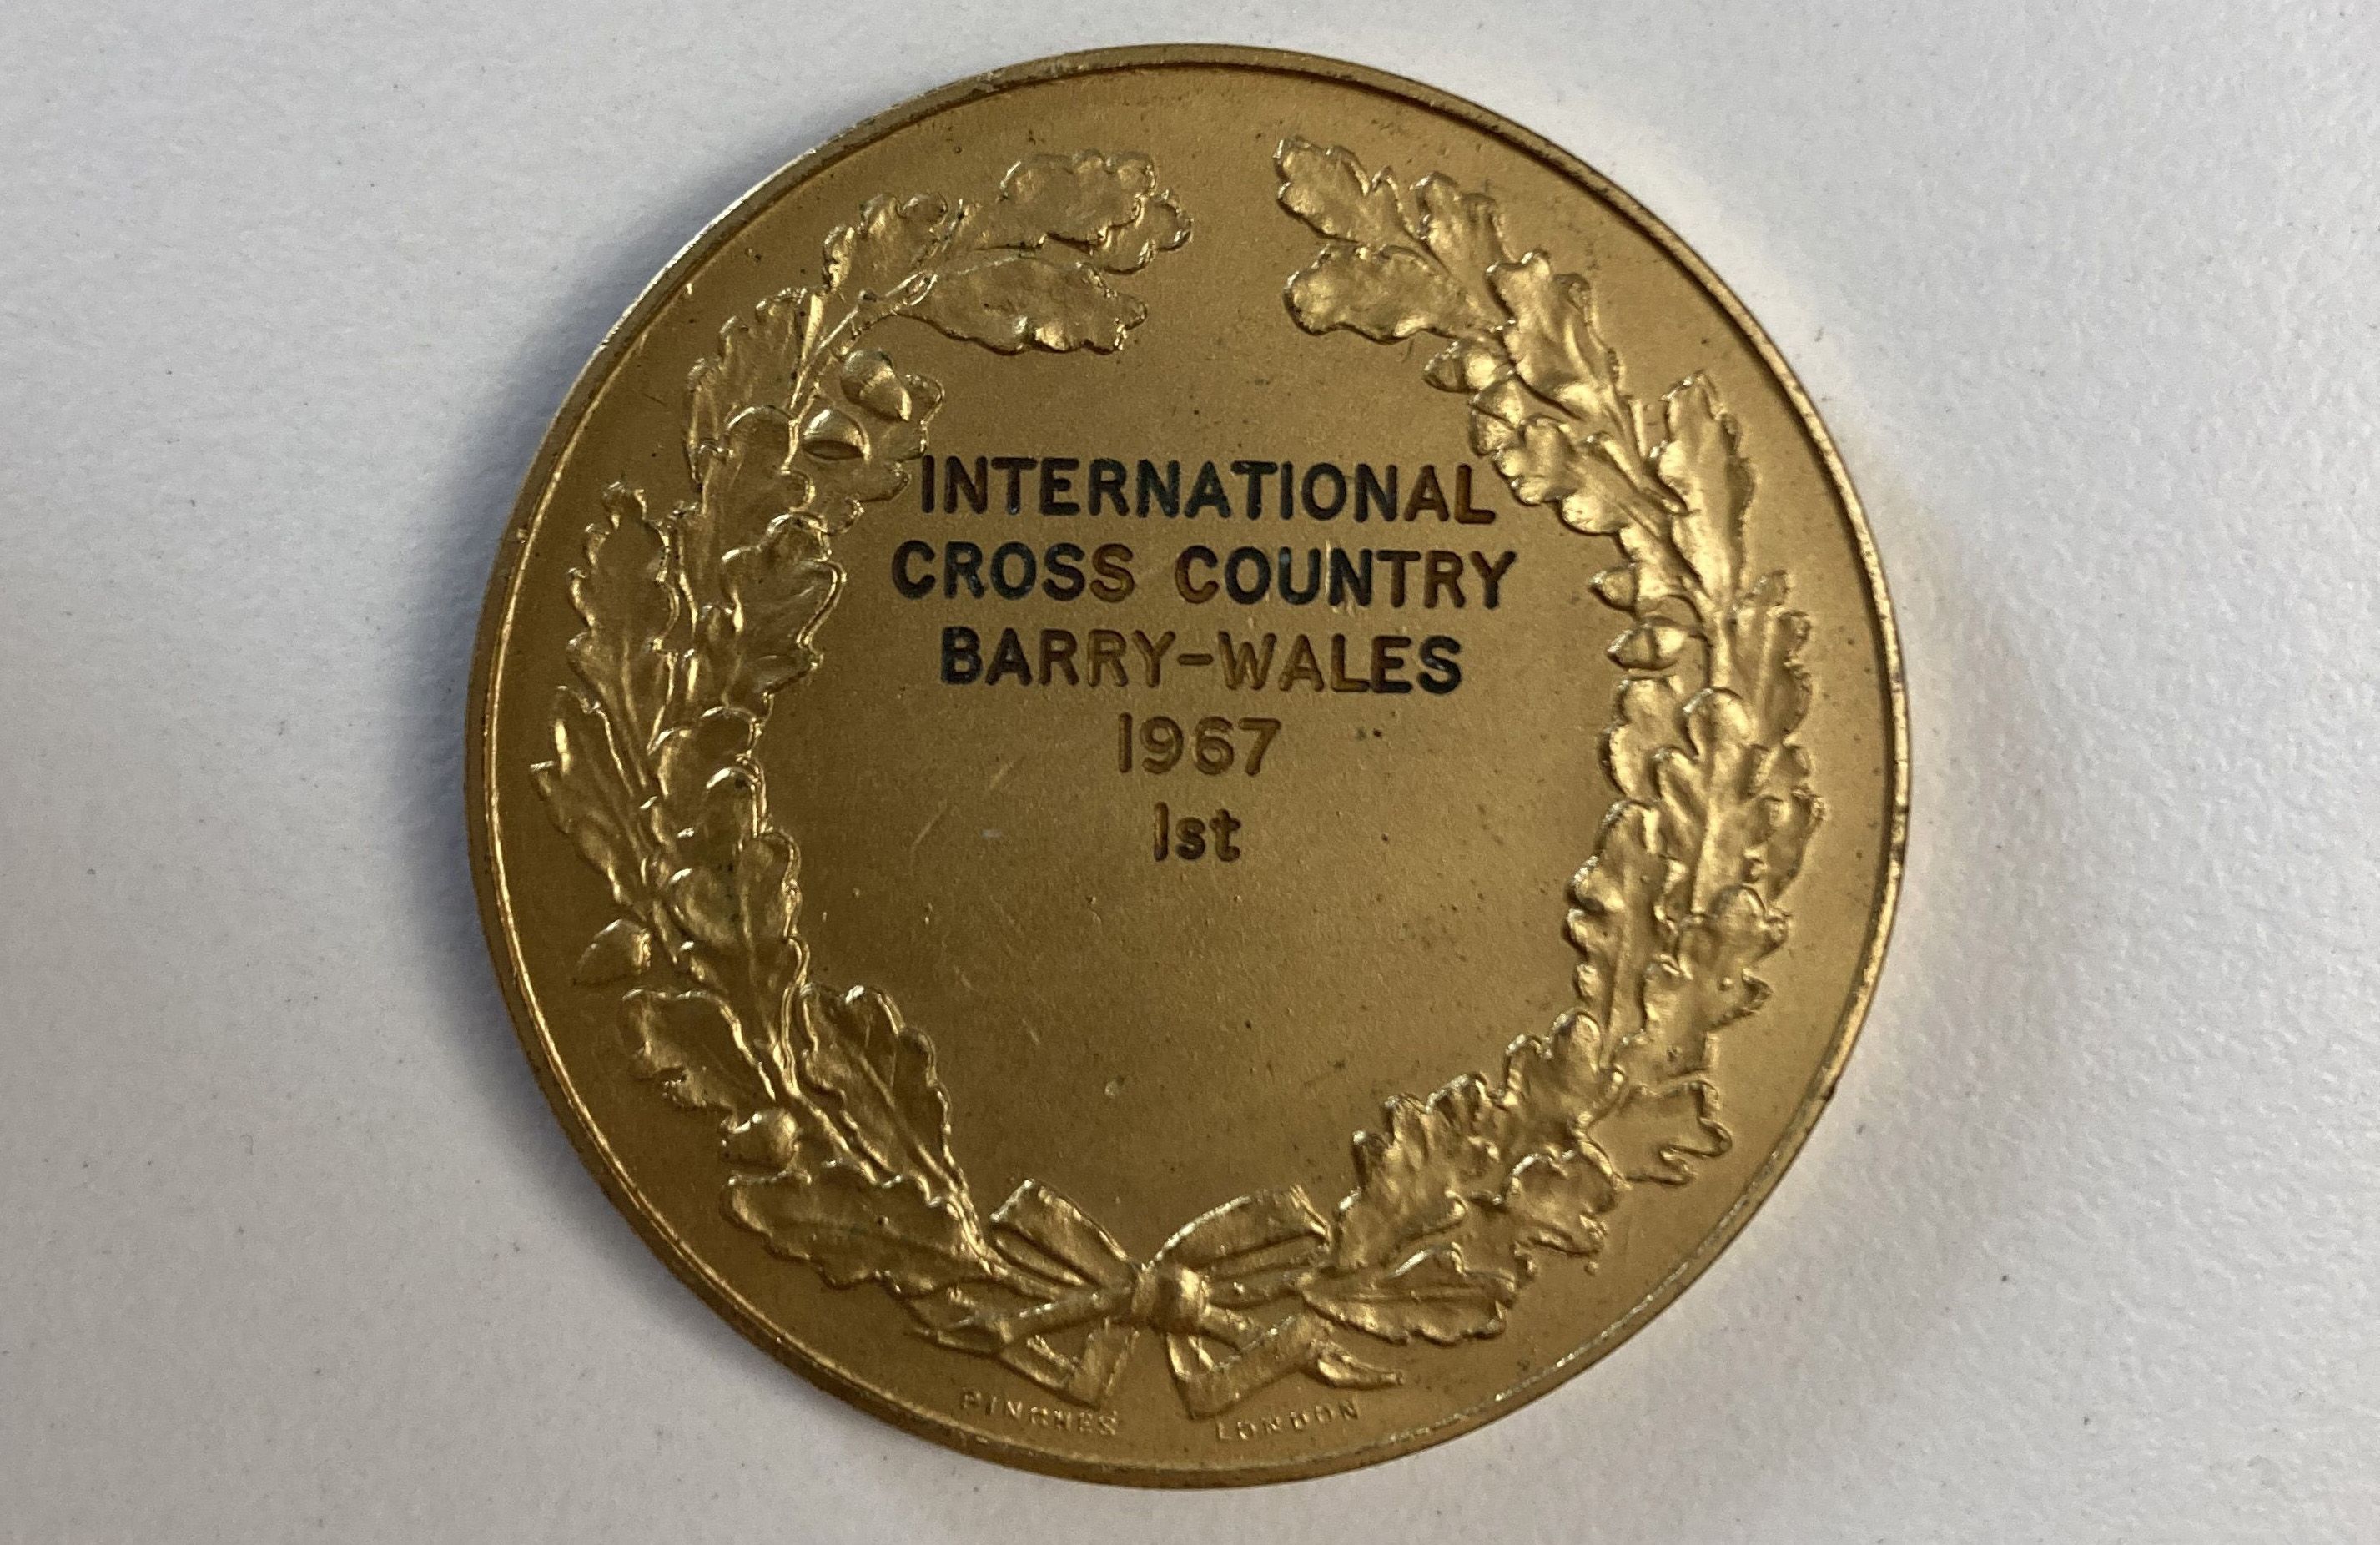 The reverse of Doris Brown Heritage's historic cross country gold medal